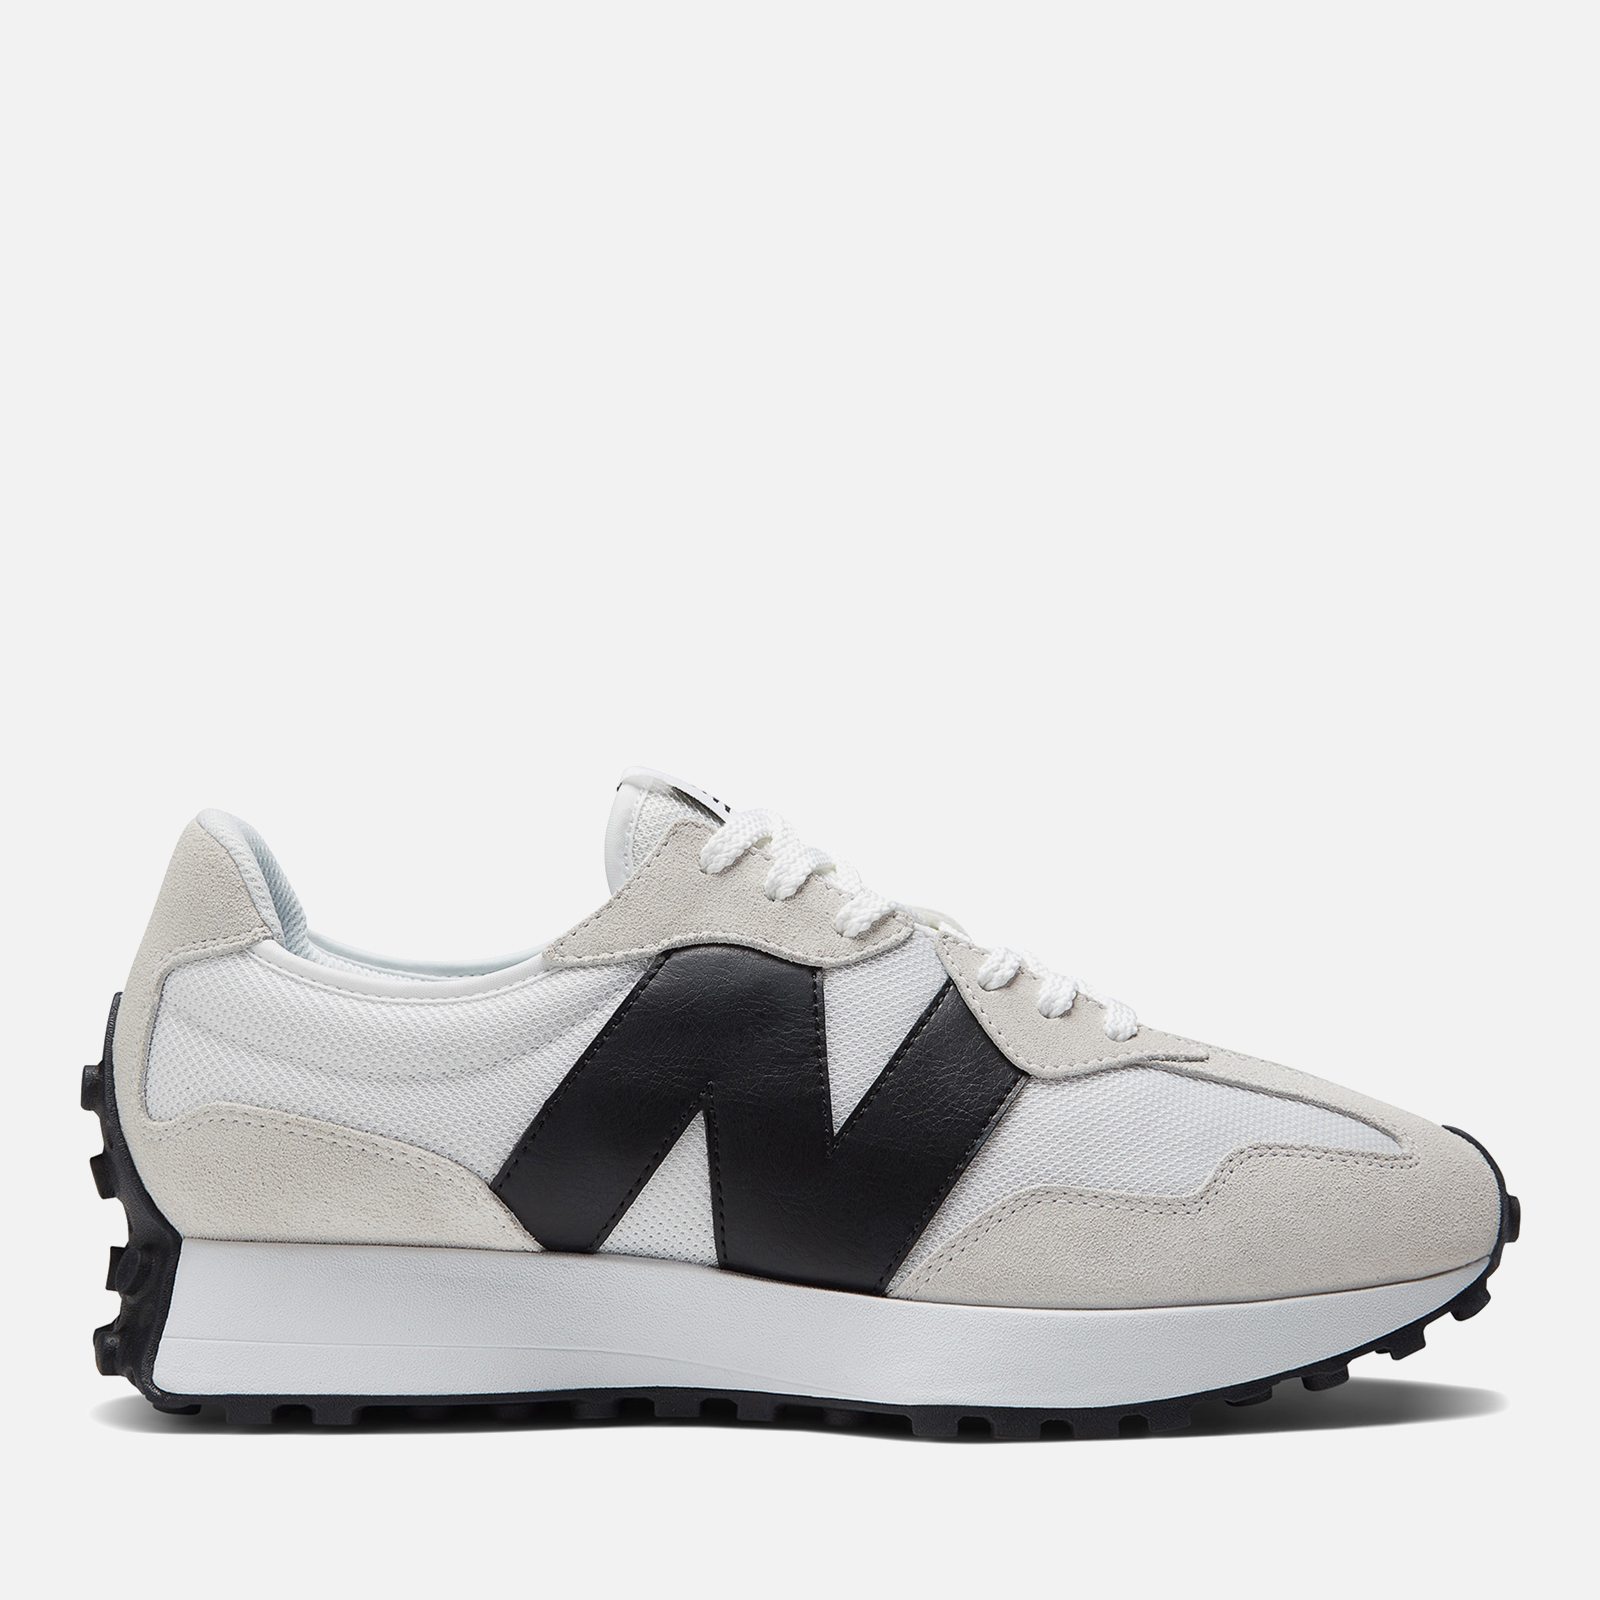 New Balance 327 Suede and Mesh Trainers - UK 11 | Coggles